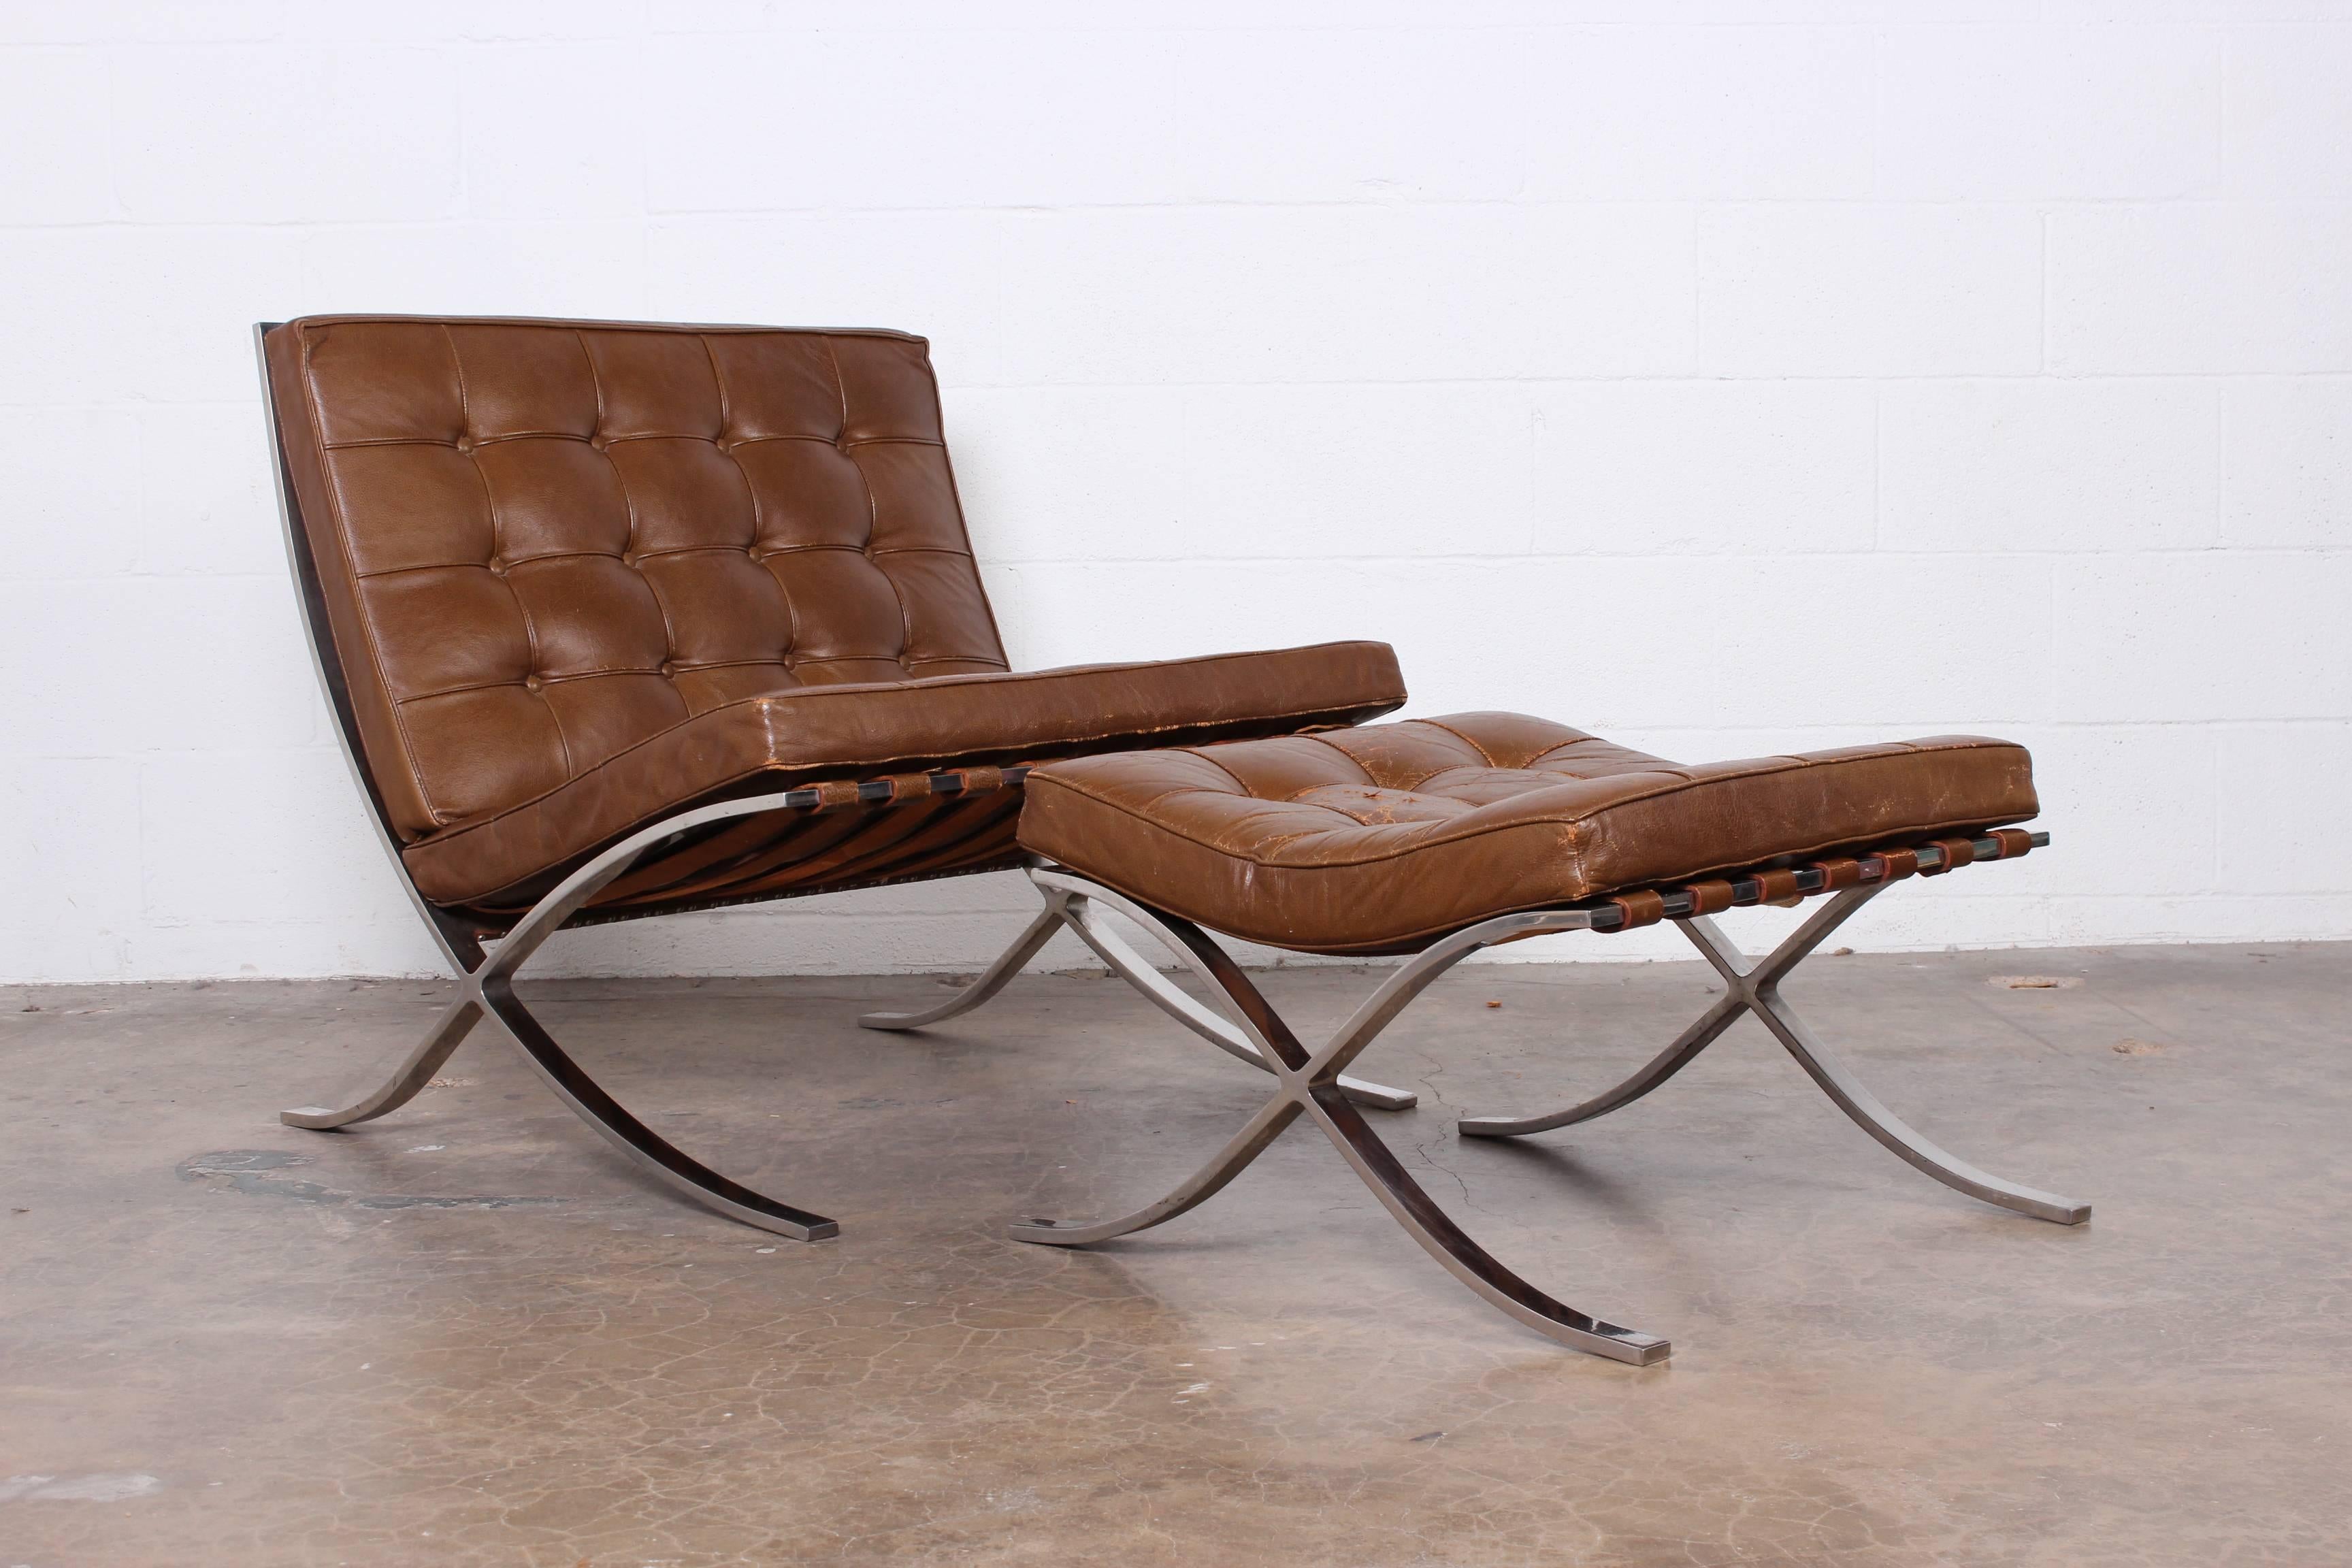 Mid-20th Century Barcelona Chair and Ottoman by Mies van der Rohe for Knoll